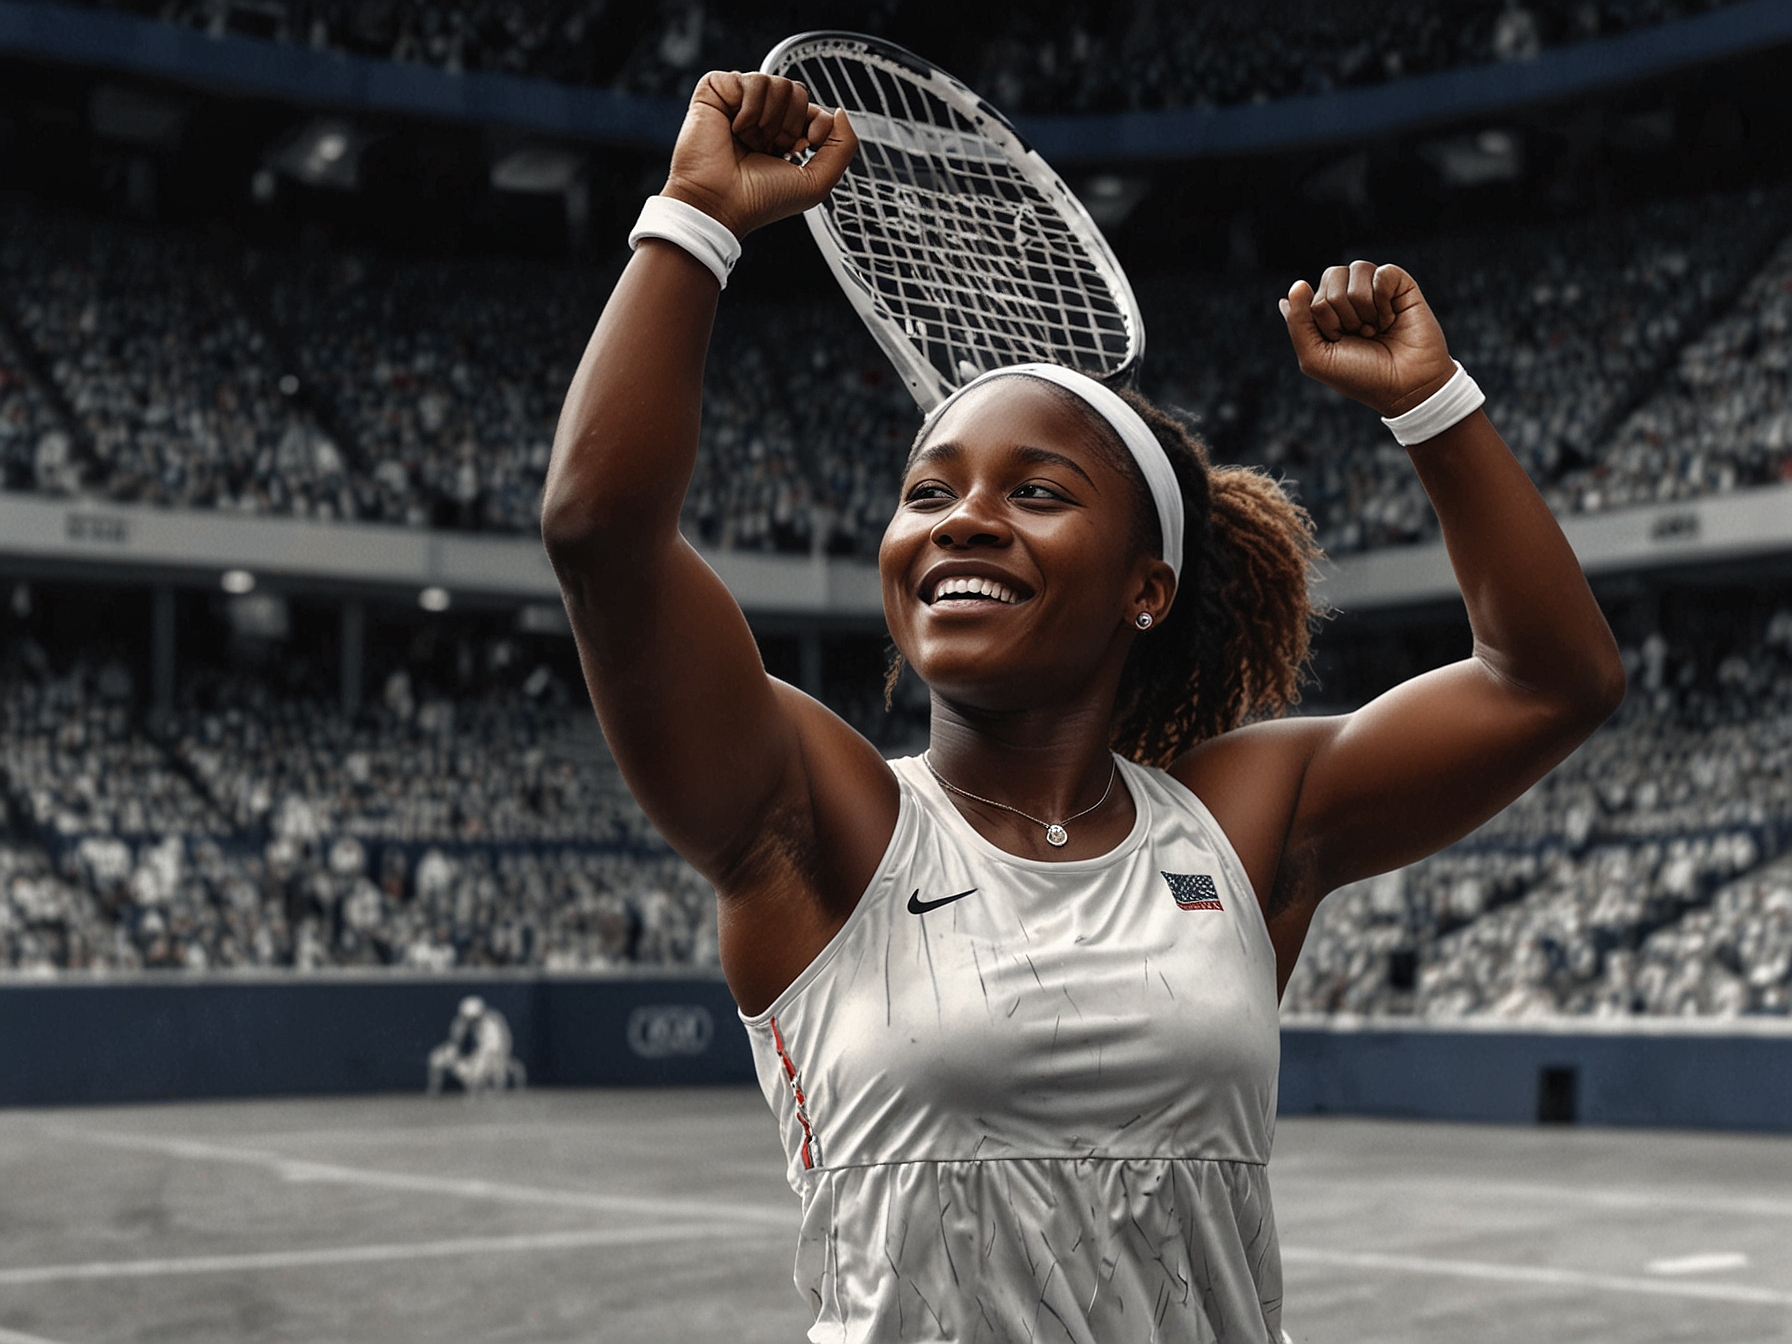 Coco Gauff celebrates her recent U.S. Open victory, symbolizing her strong form and determination as she prepares to lead the U.S. tennis squad at the Paris Olympics.